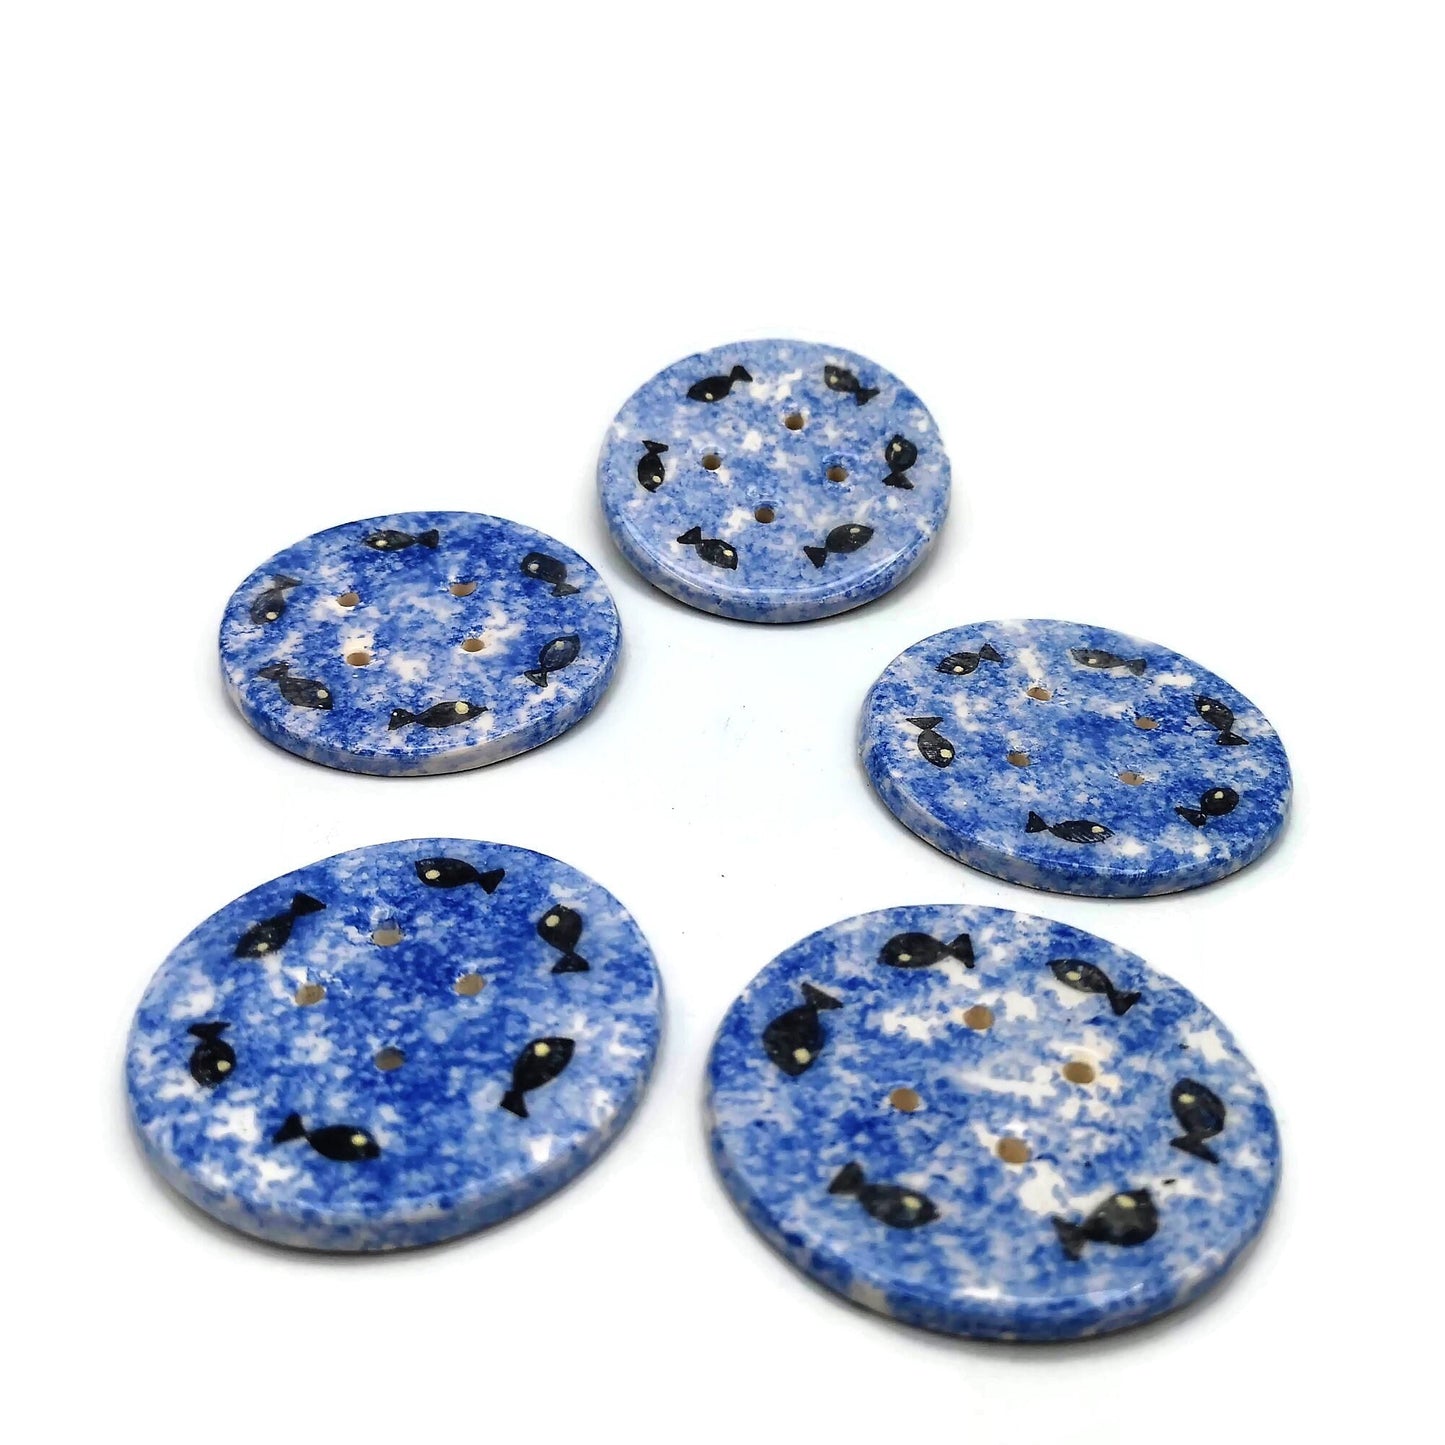 5Pc 65mm Giant Sewing Buttons, Handmade Ceramic Coat Buttons With Hand Painted Fish, Decorative Novelty Buttons for Crafts Extra Large - Ceramica Ana Rafael